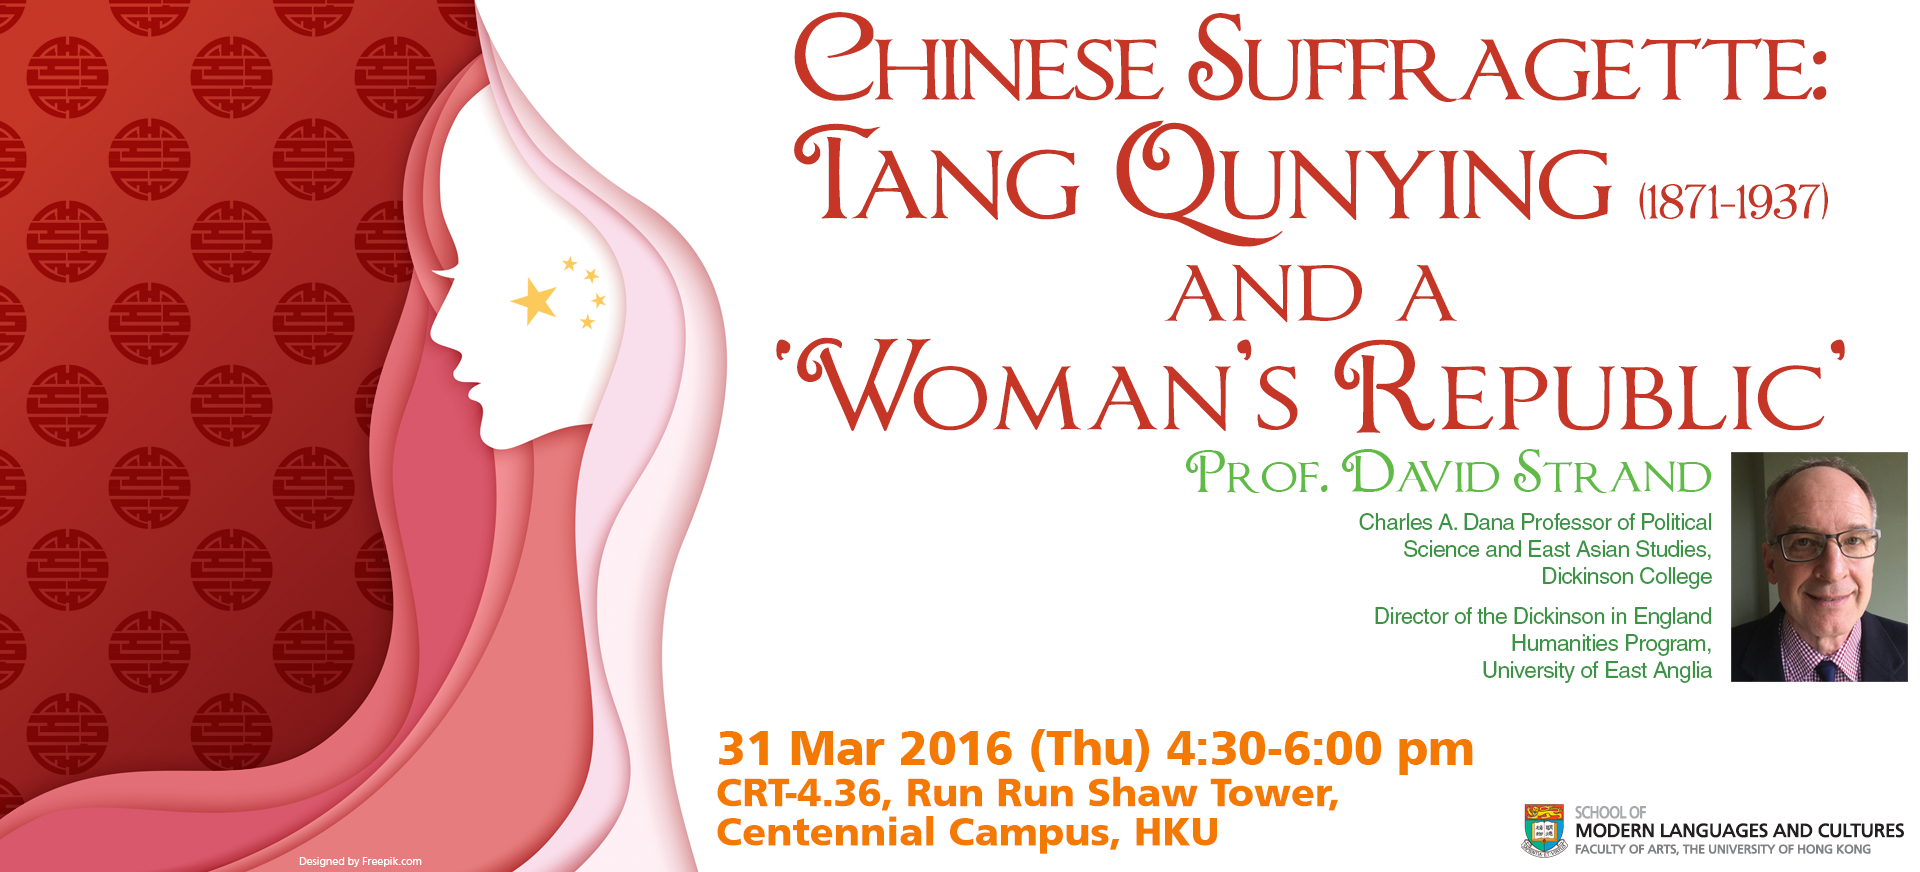 Chinese Suffragette:  Tang Qunying (1871-1937)  and a 'Woman's Republic'